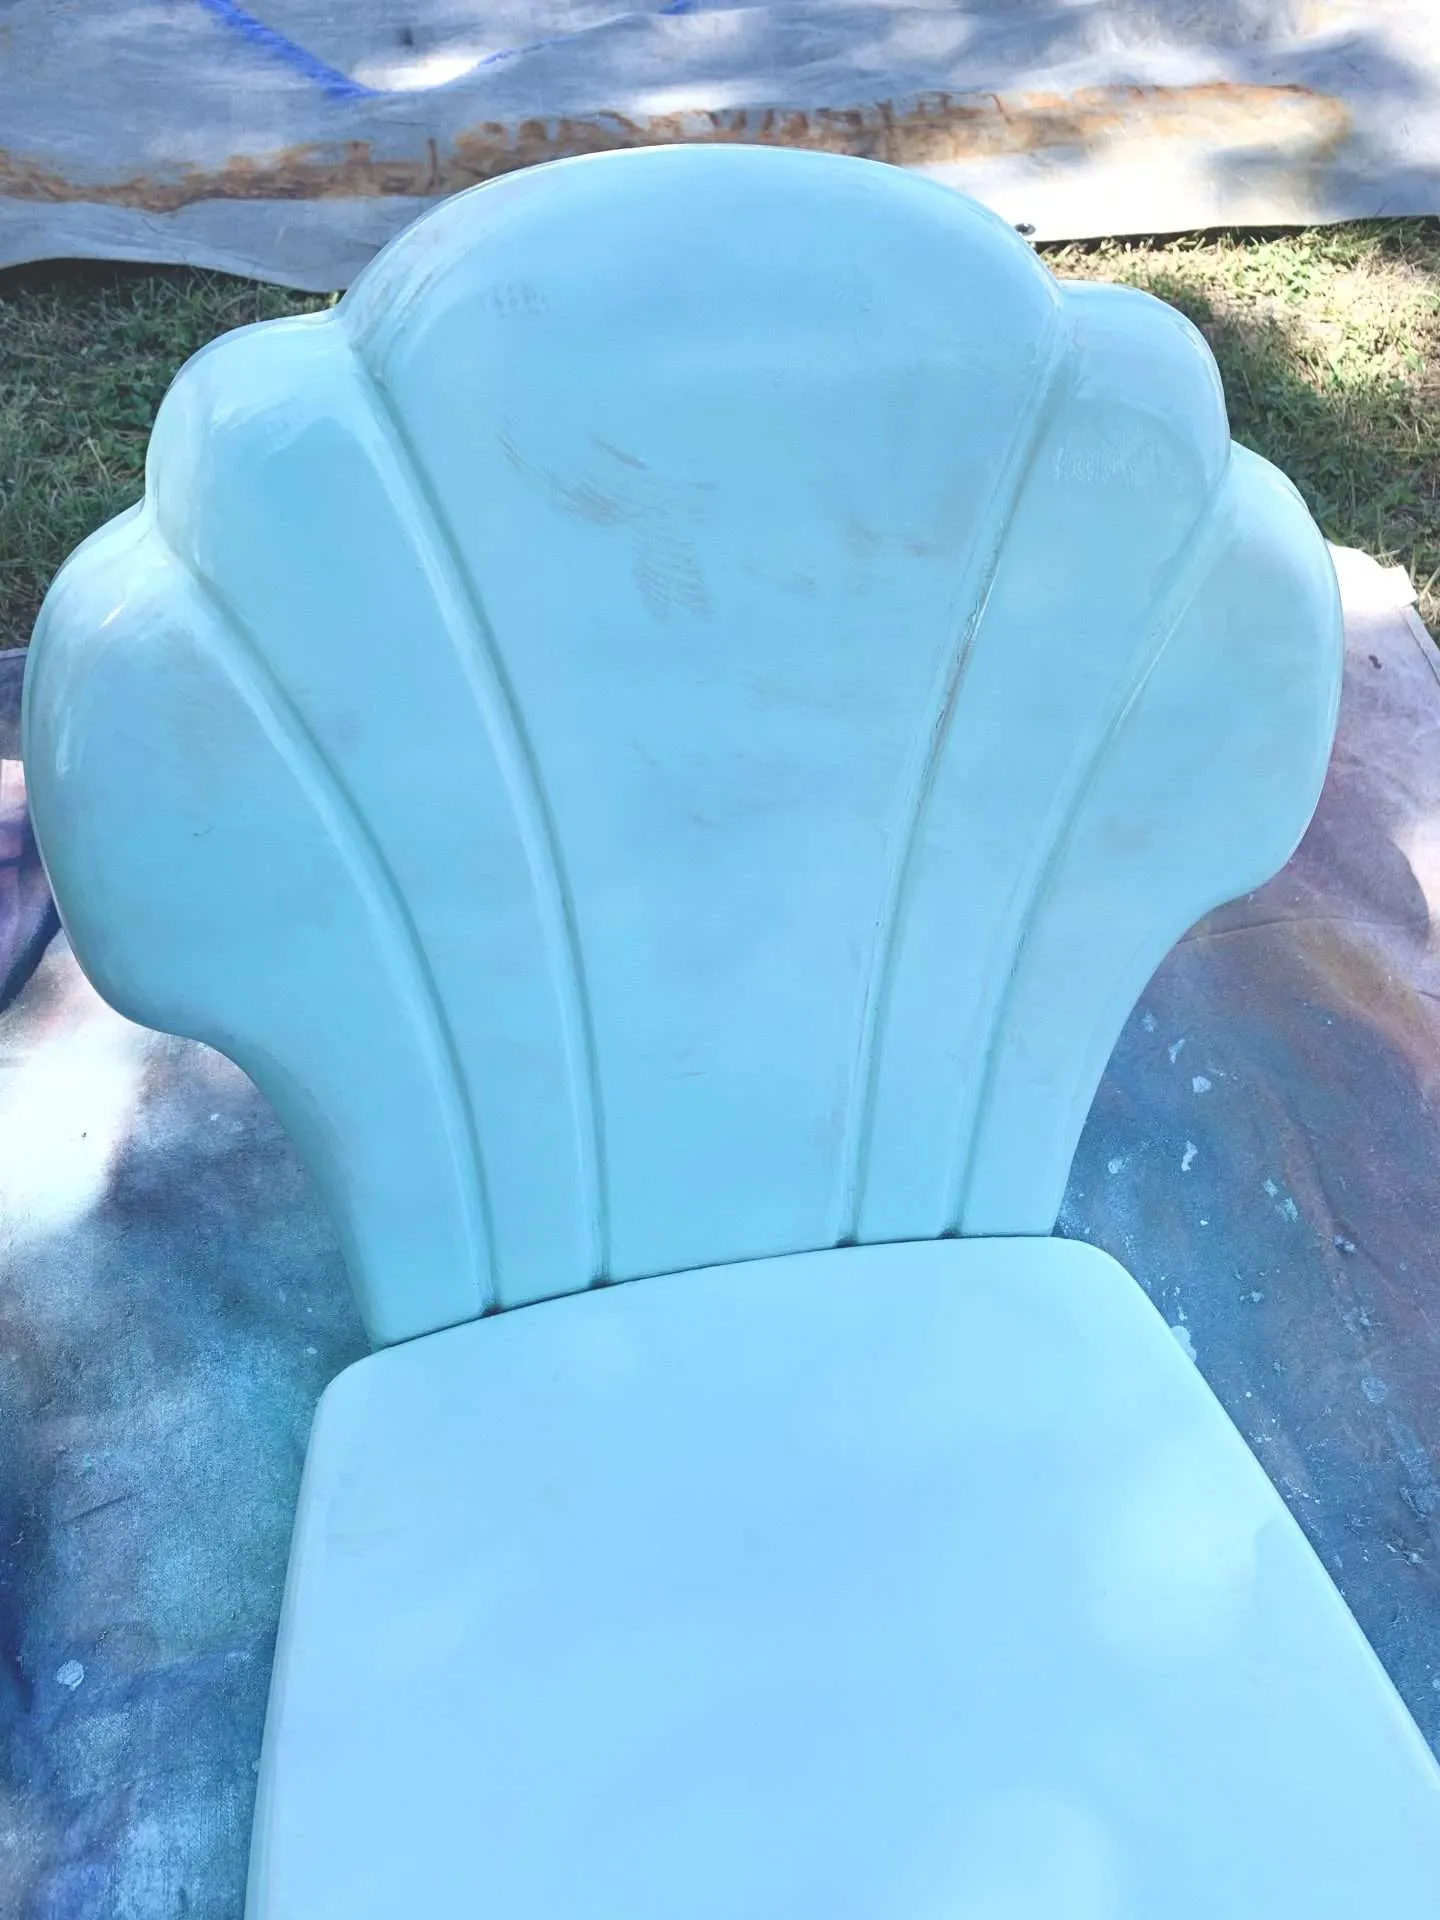 Use primer when painting vintage metal chairs to prevent bleed through.